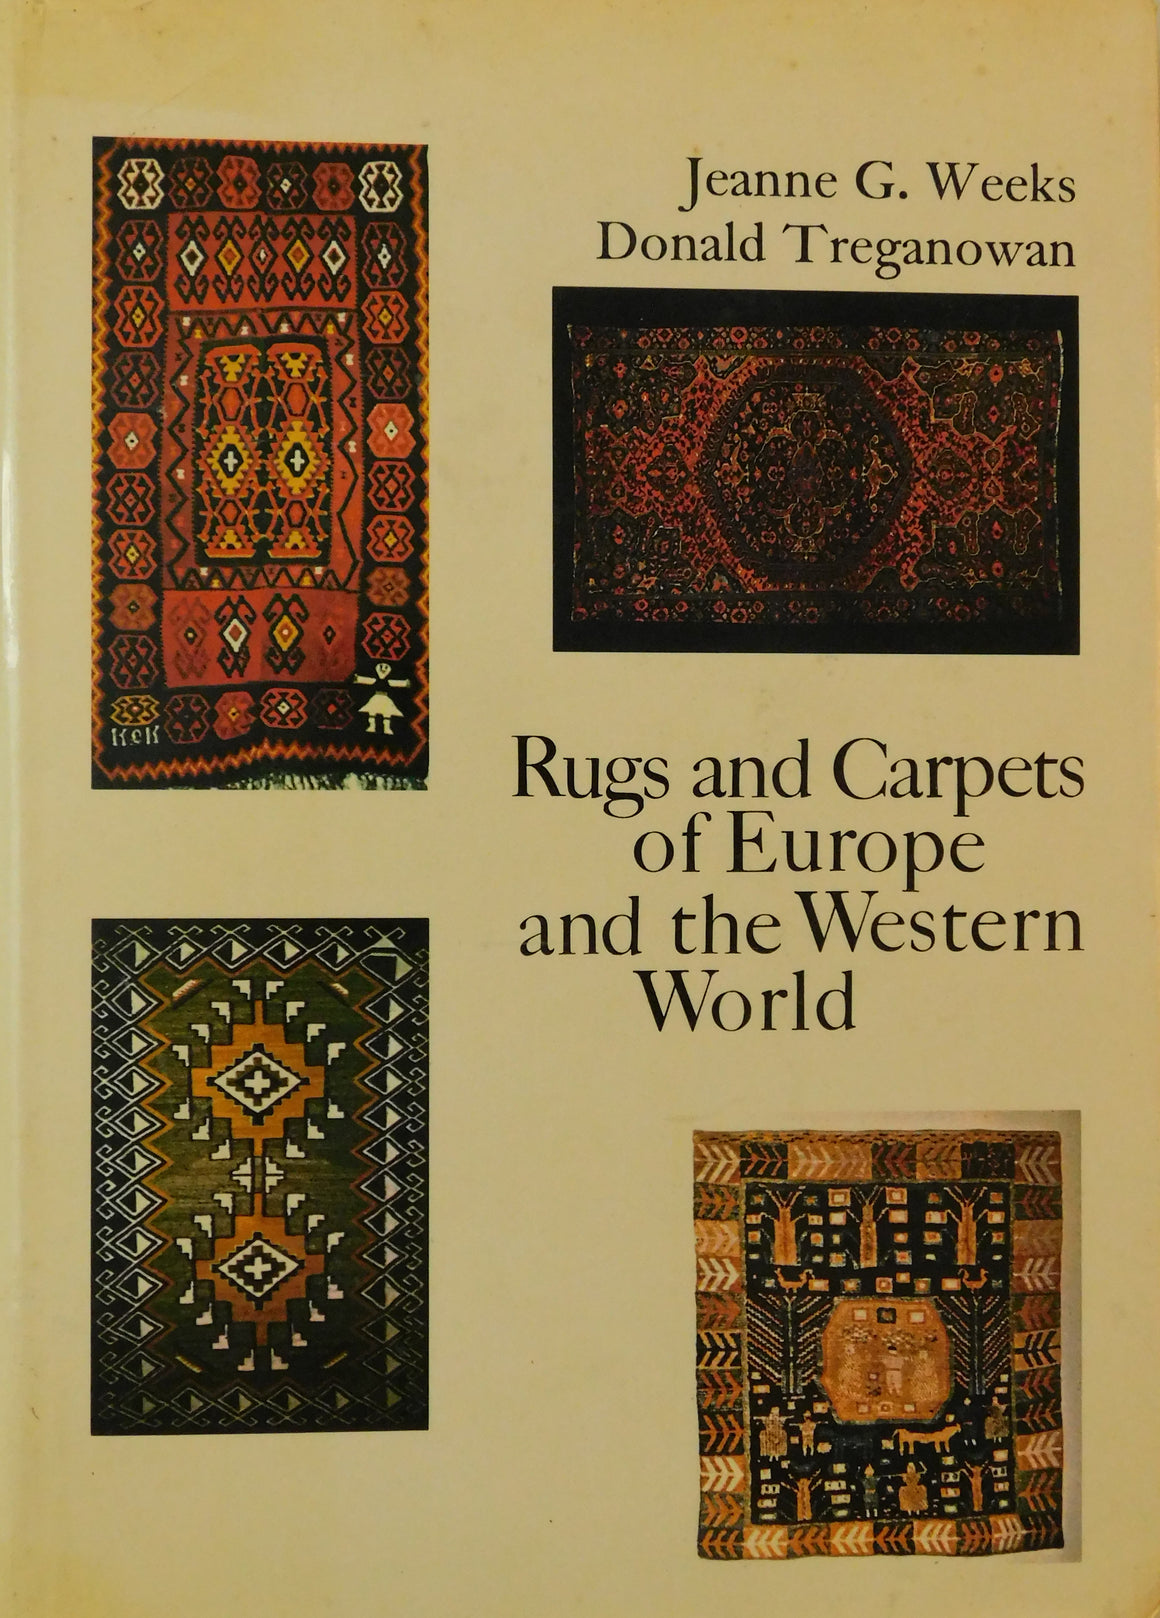 Rugs and Carpets of Europe and the Western World - Used Book